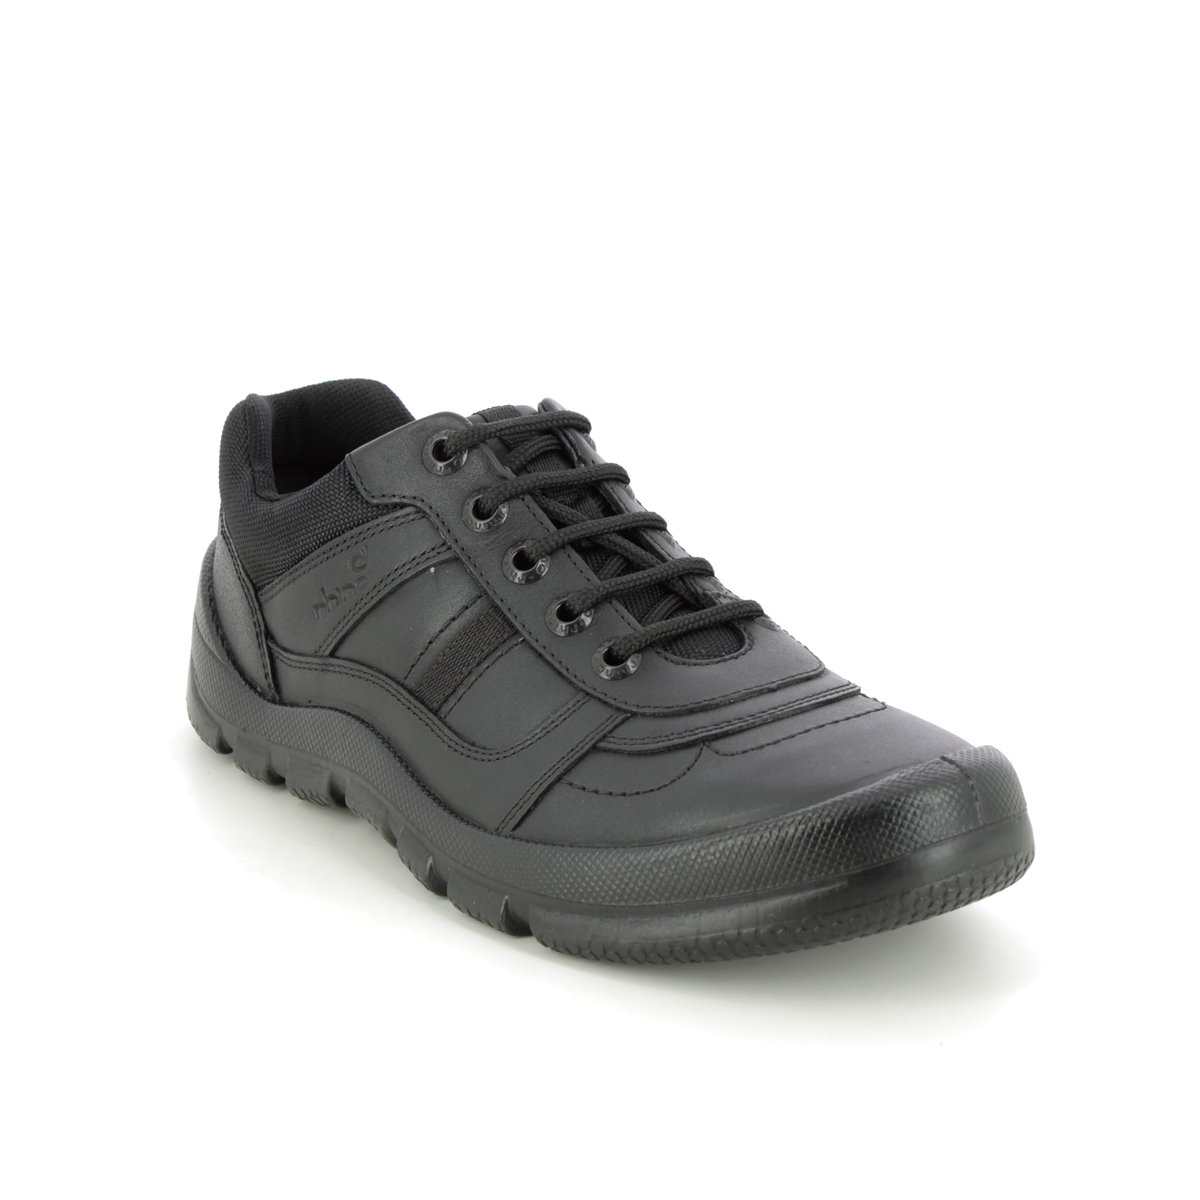 Start Rite - Rhino Warrior Lace In Black Leather 8238-76F In Size 3.5 In Plain Black Leather For School Boys Shoes  In Black Leather For kids